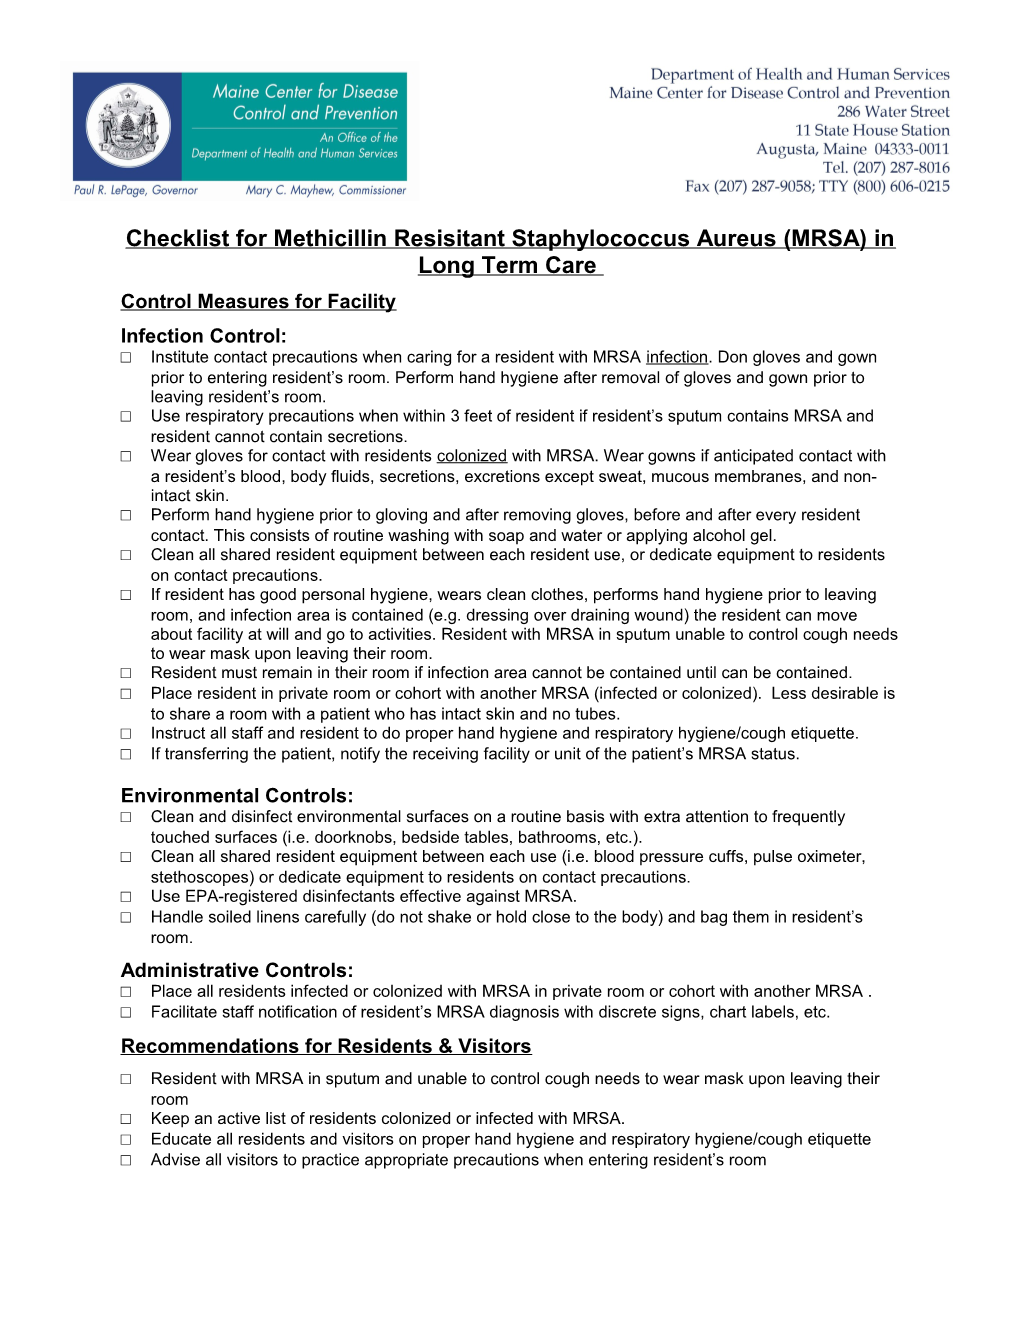 Norovirus Outbreak Guidance for Long Term Care Checklist